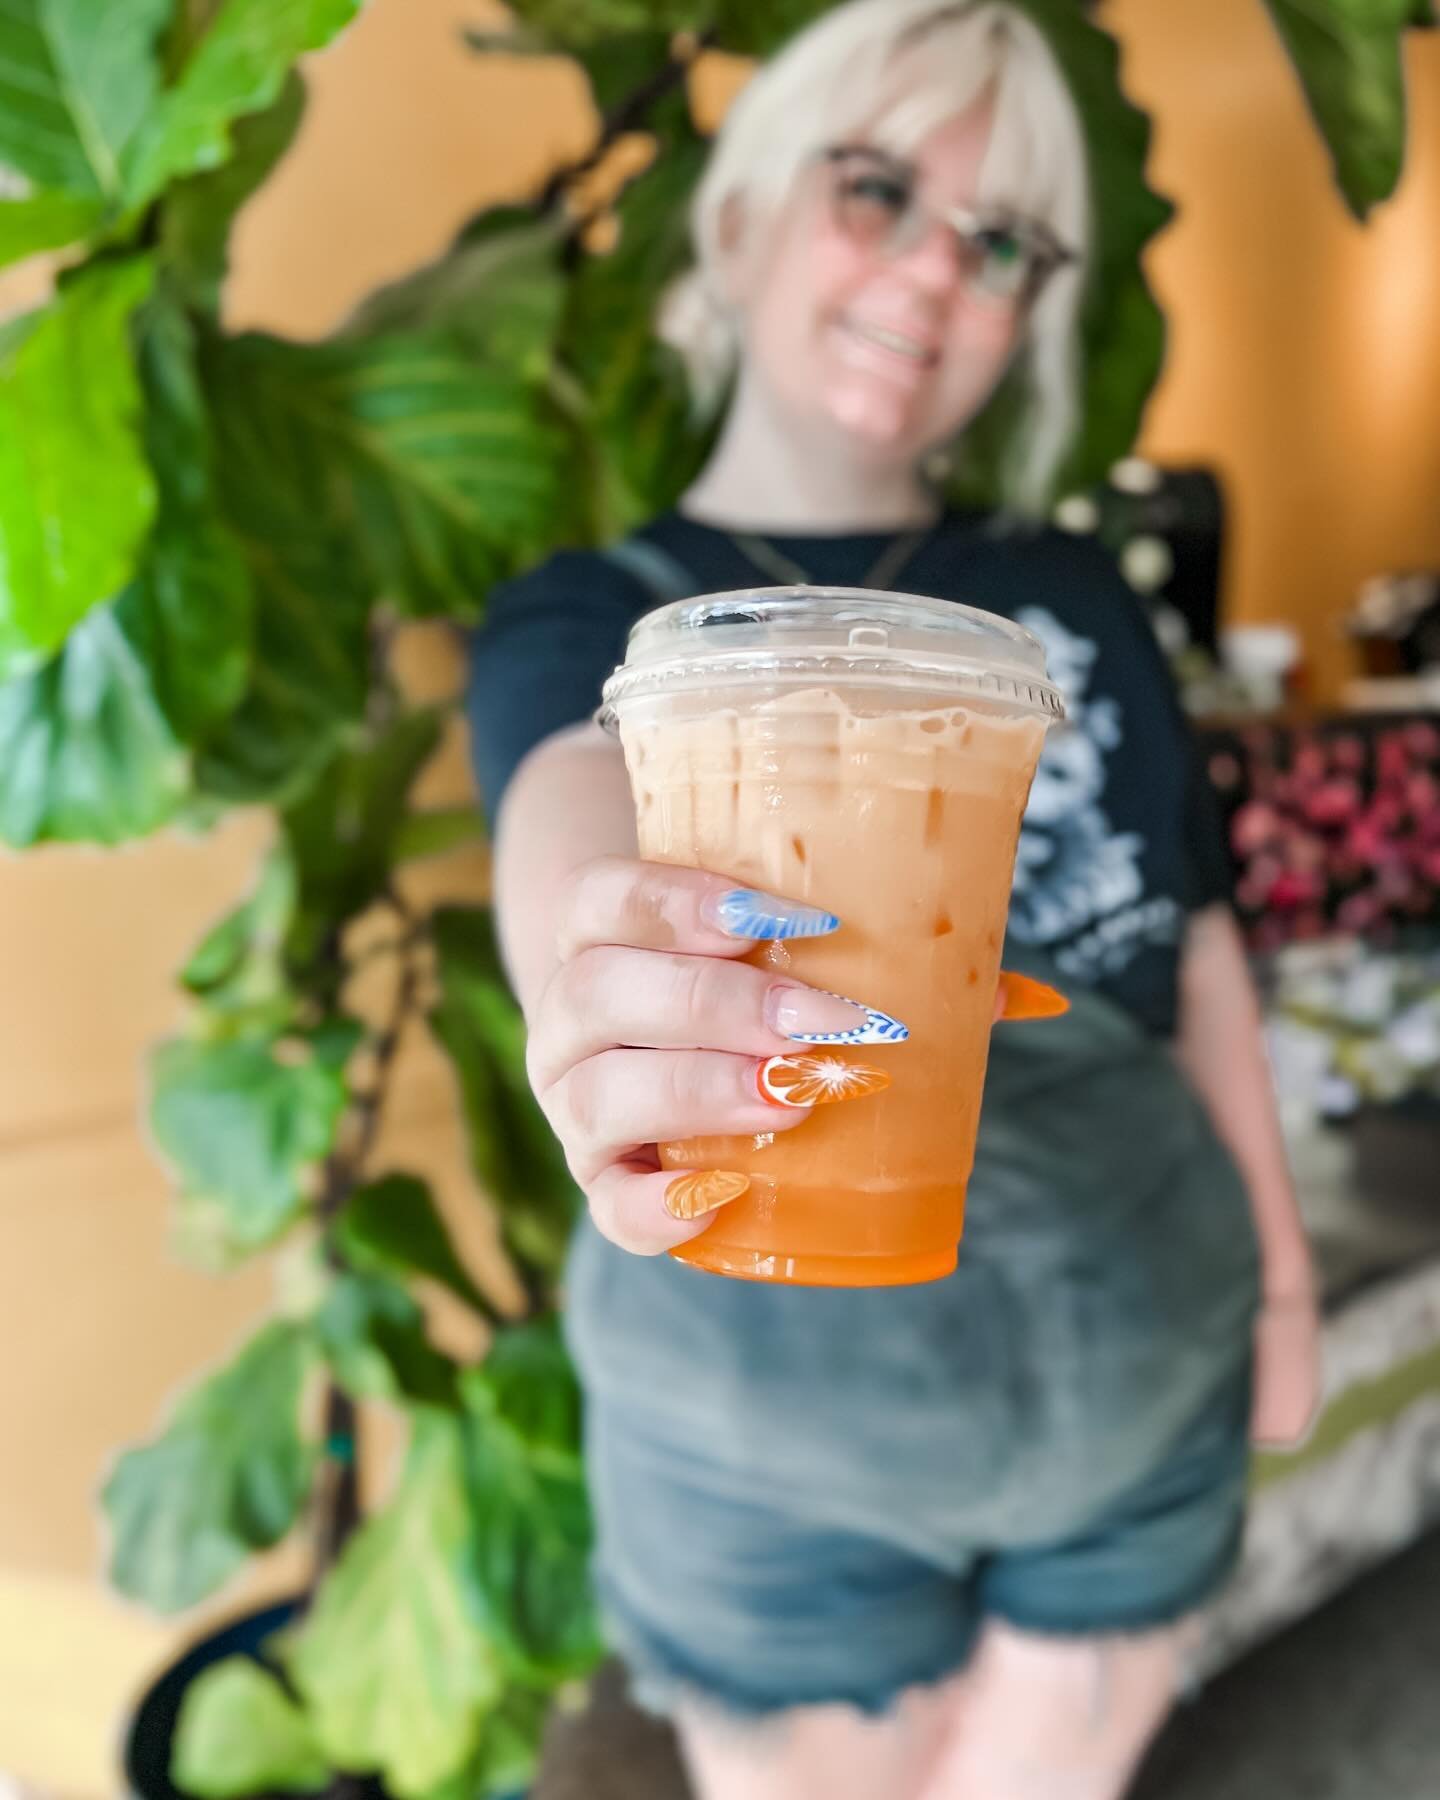 🍊Summer is approaching and the temperatures and rising. Cool off with our Orange Creamcsicle Italian Soda!🍊

#summer #orangecreamsicle #soda #sunnyvibes